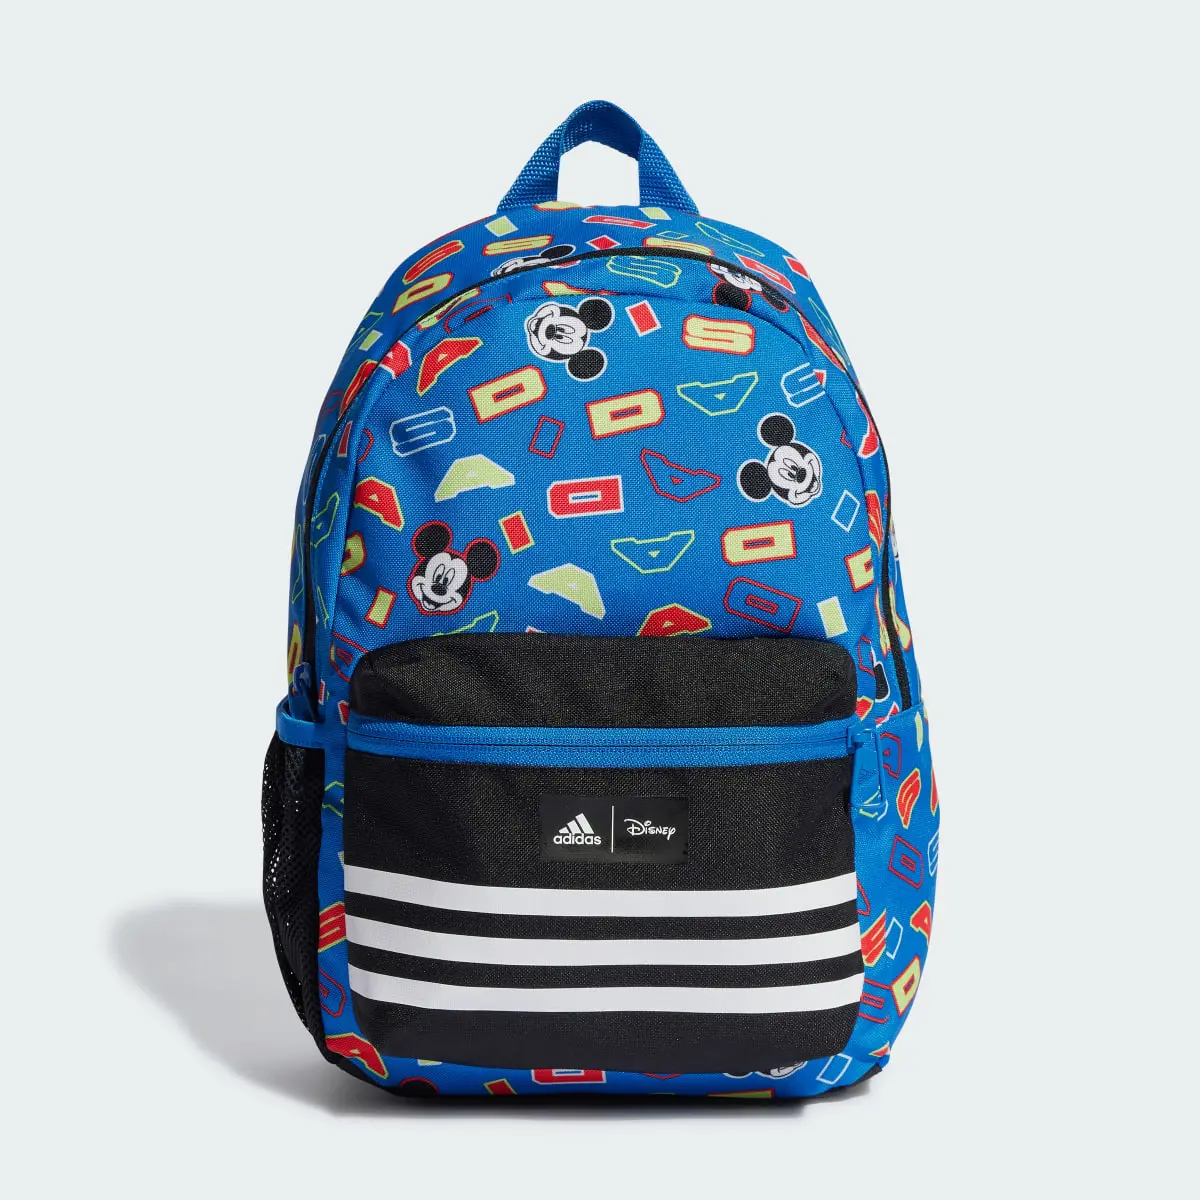 Adidas Disney Mickey Mouse Backpack. 2